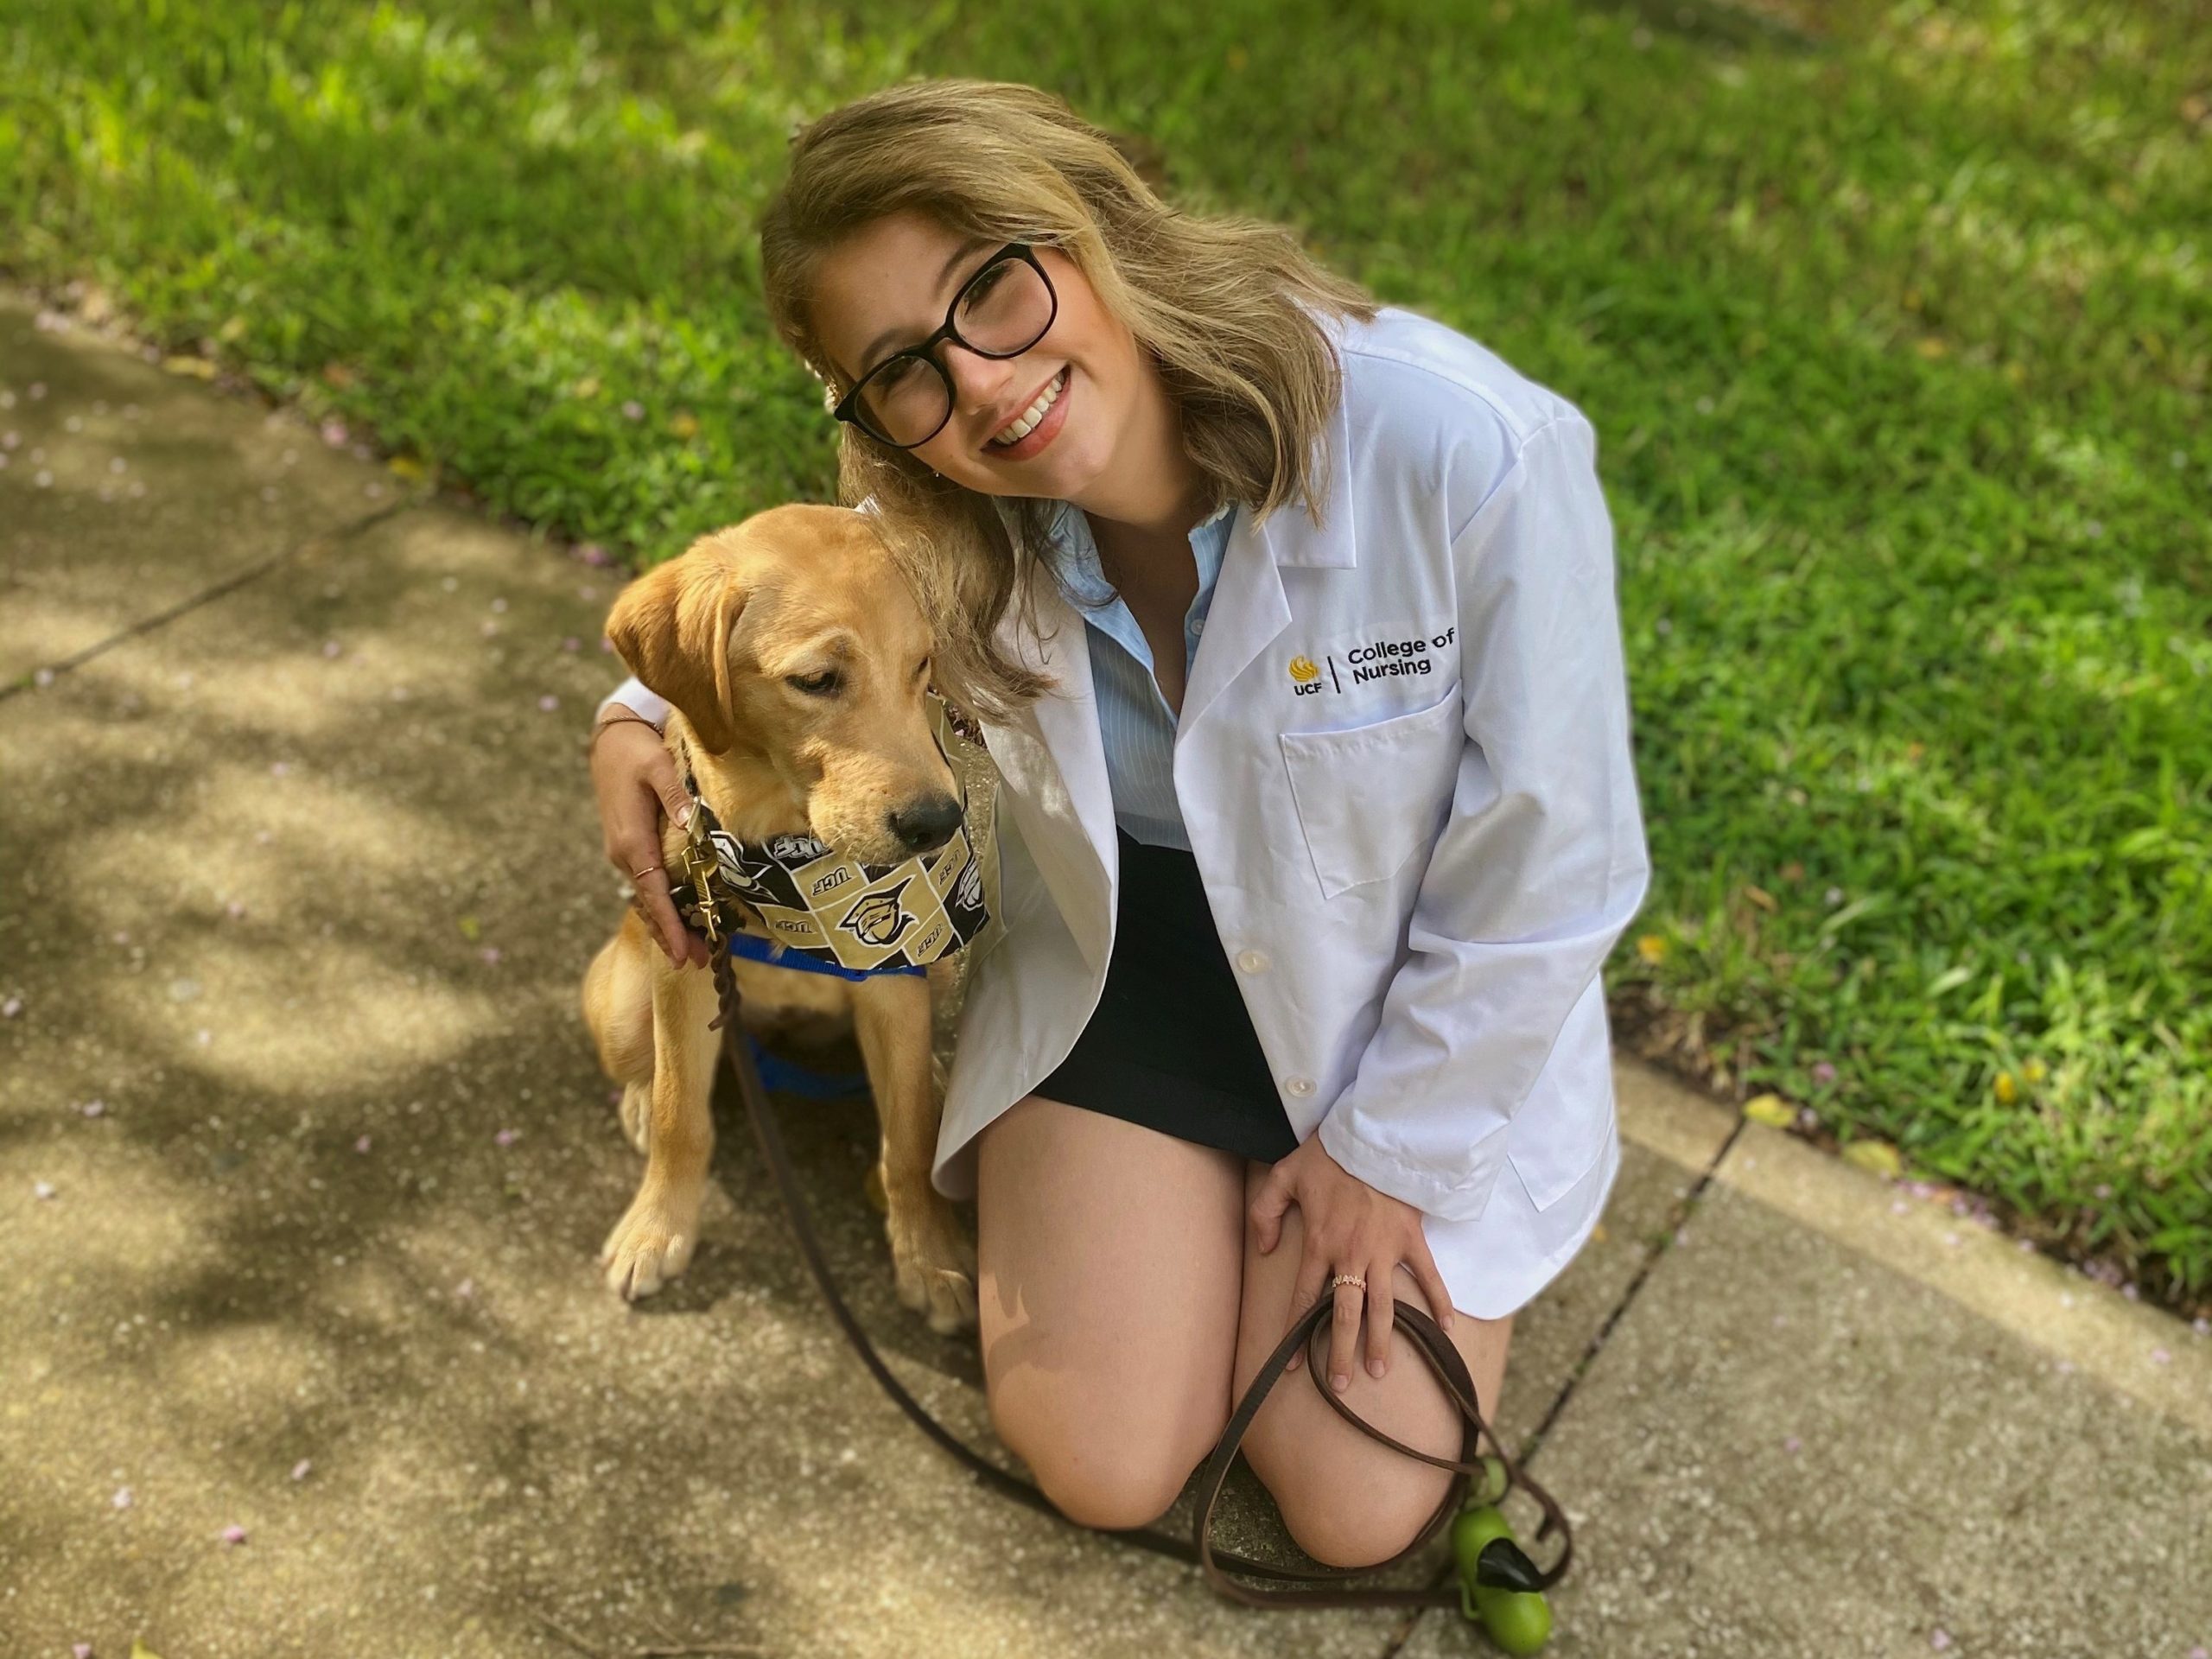 BSN student Marlee with Canine Companion puppy Isabel IV